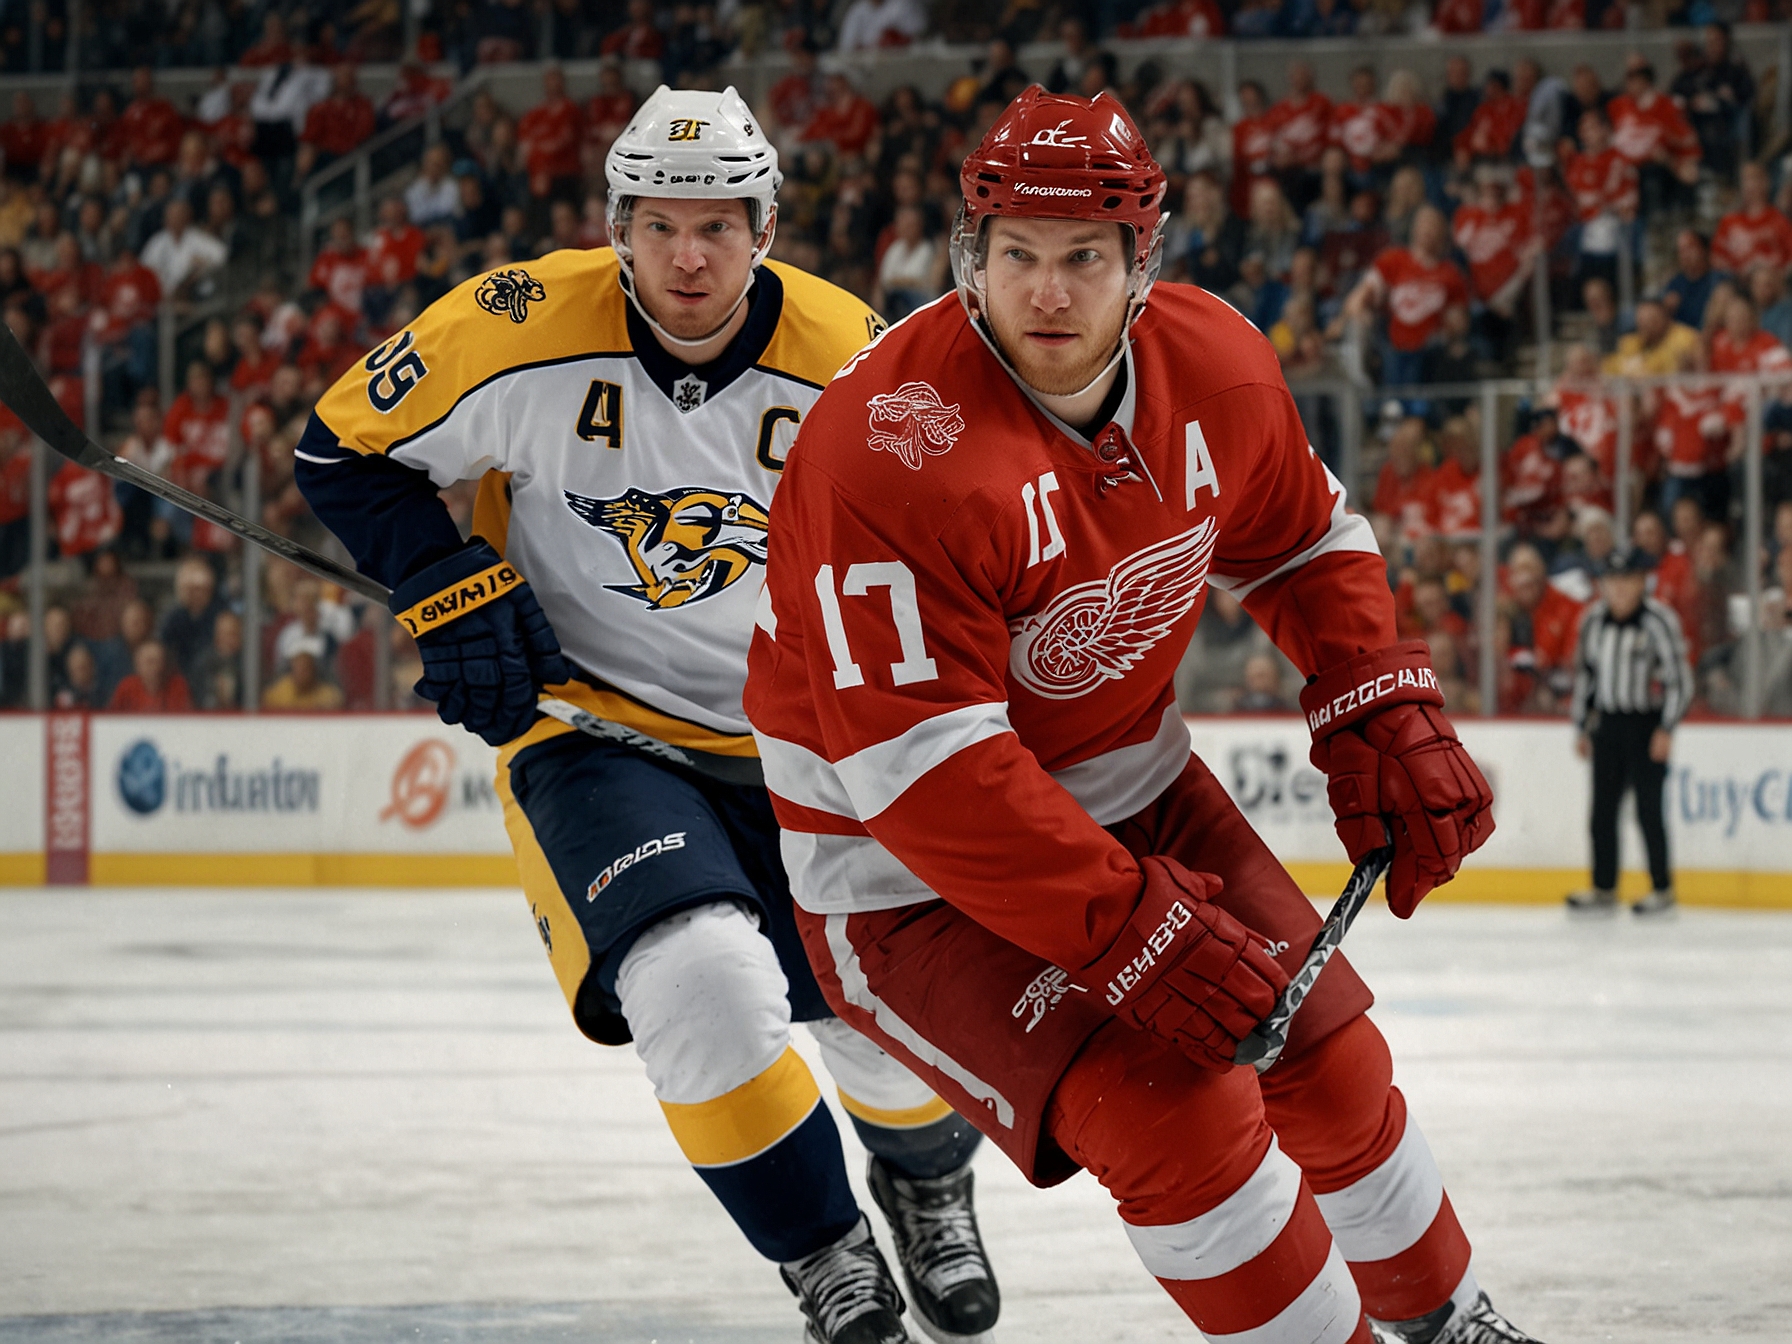 A dynamic action shot of the players involved in the trade—forward Jesse Kiiskinen in Red Wings gear and defenseman Andrew Gibson in Predators jersey, representing their new teams.